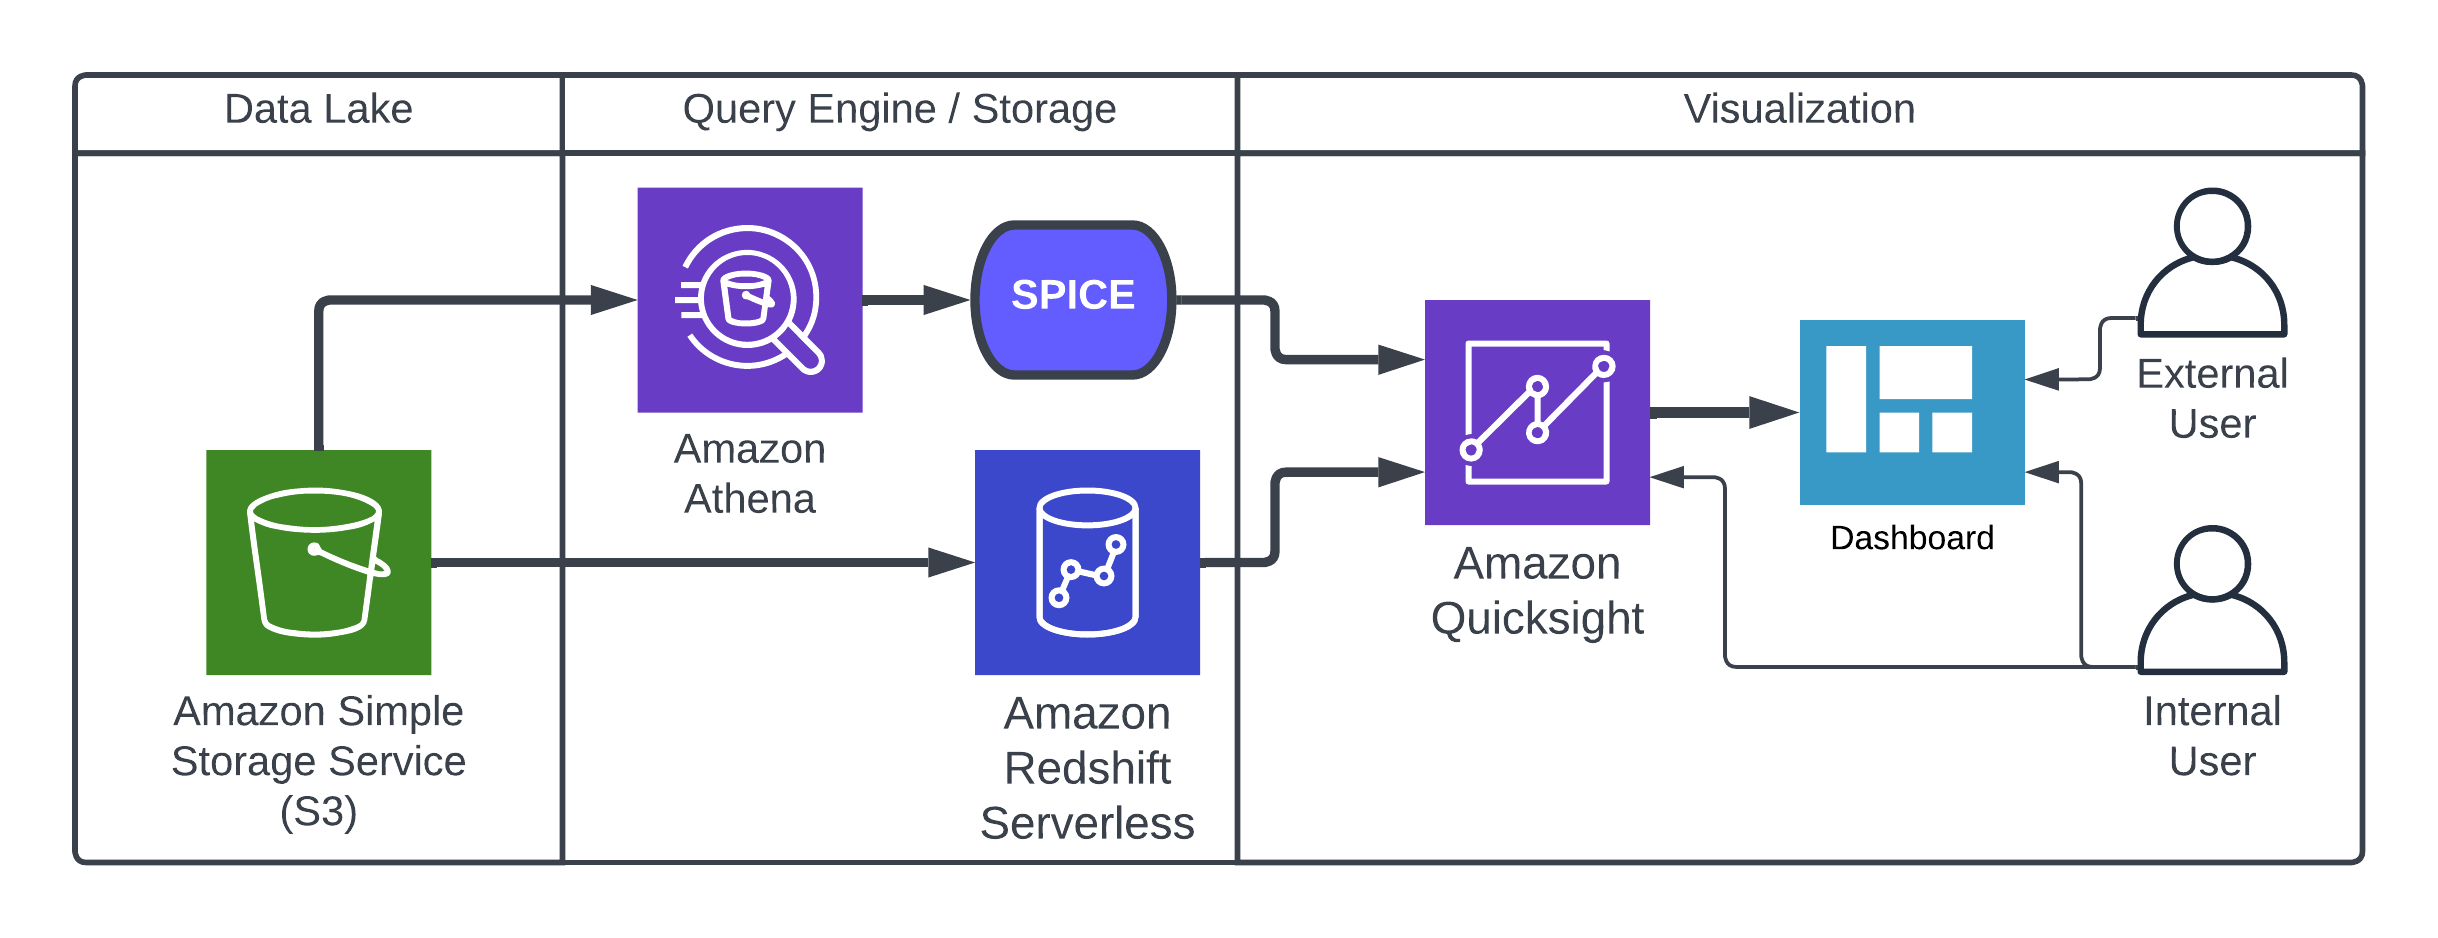 Enable business users to analyze large datasets in your data lake with Amazon QuickSight | Amazon Web Services